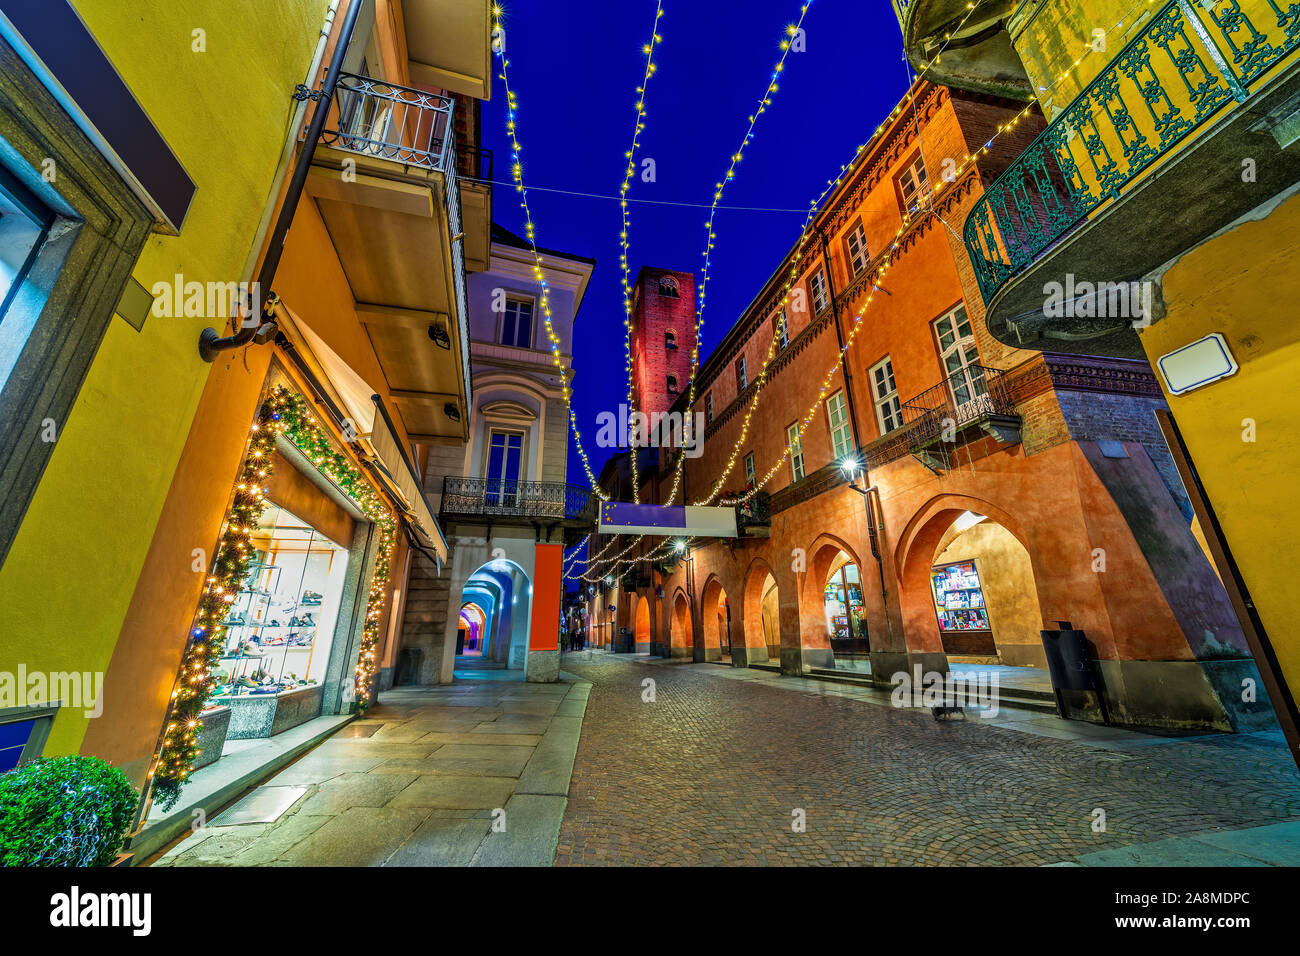 Cobblestone pedestrian street with Christmas illumination in old town of Alba in Piedmont, Northern Italy. Stock Photo